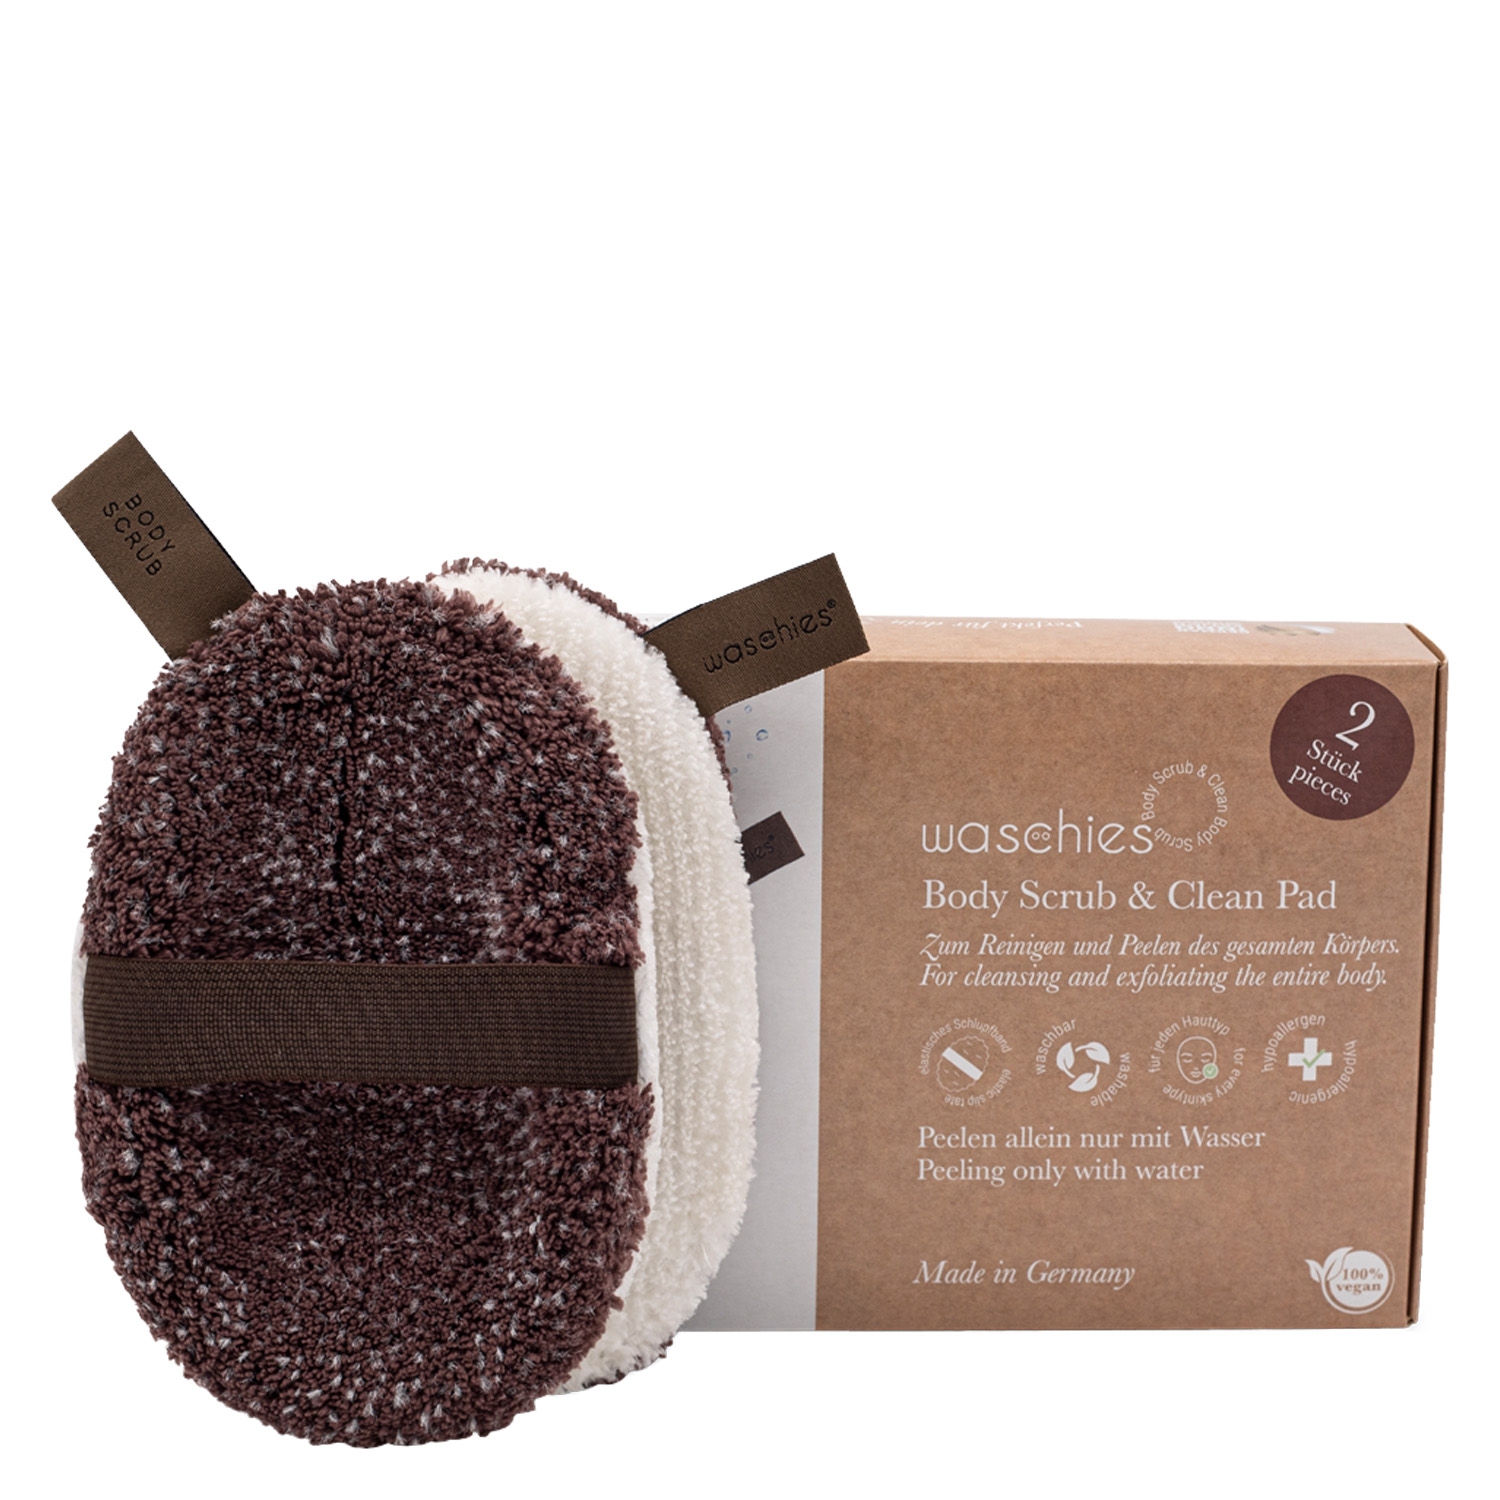 Product image from Waschies Faceline - Body Scrub & Cleanpads